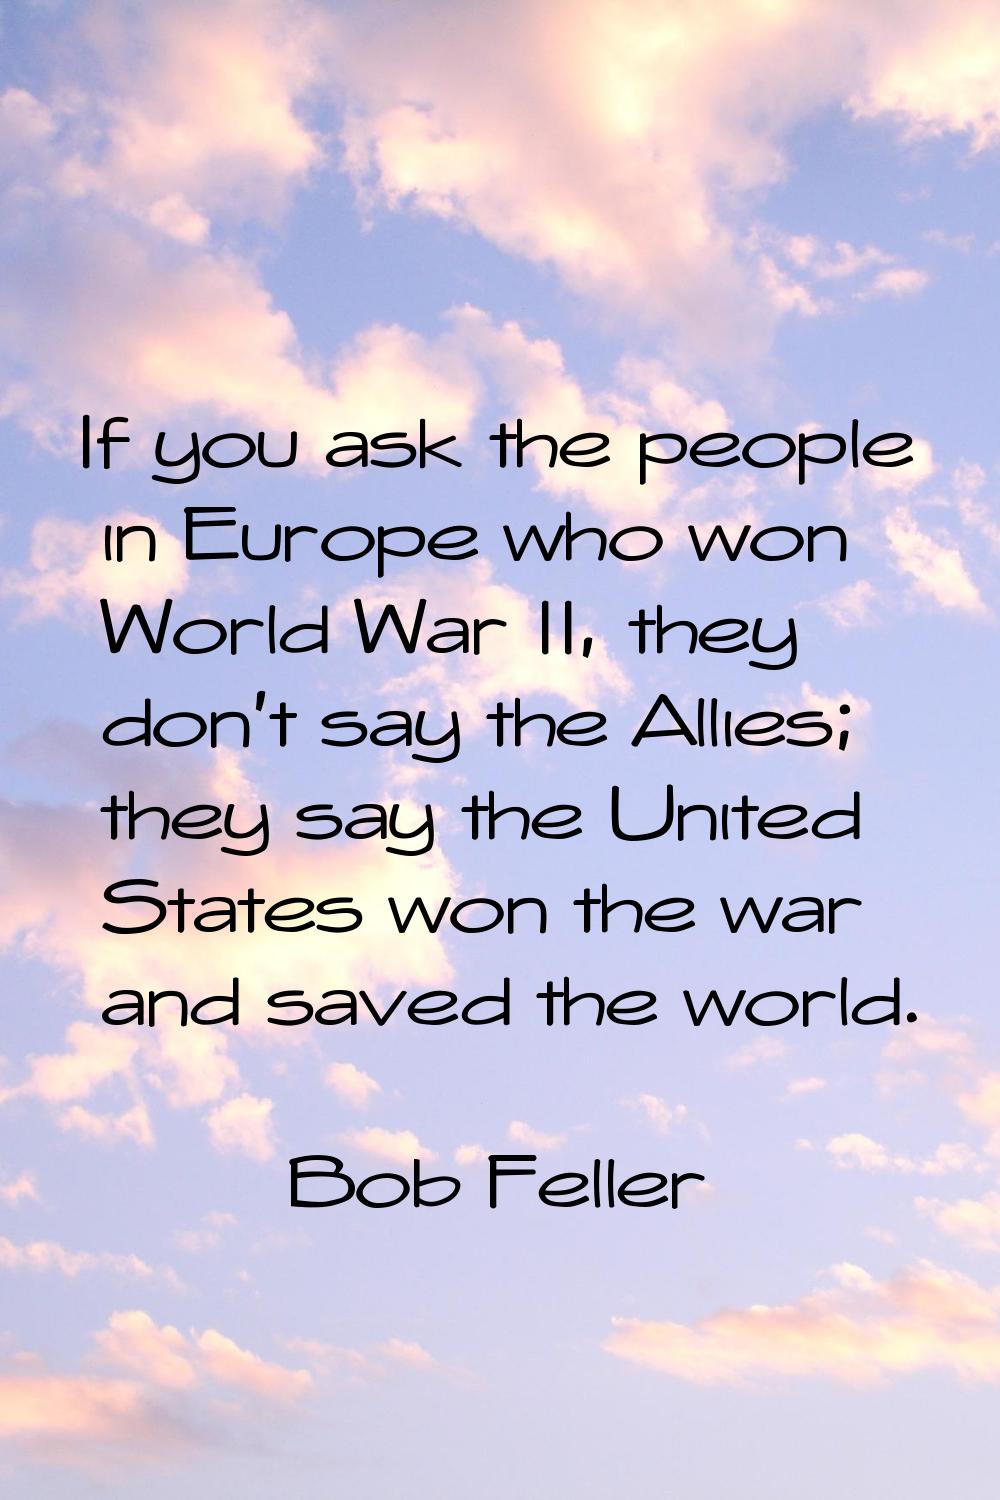 If you ask the people in Europe who won World War II, they don't say the Allies; they say the Unite